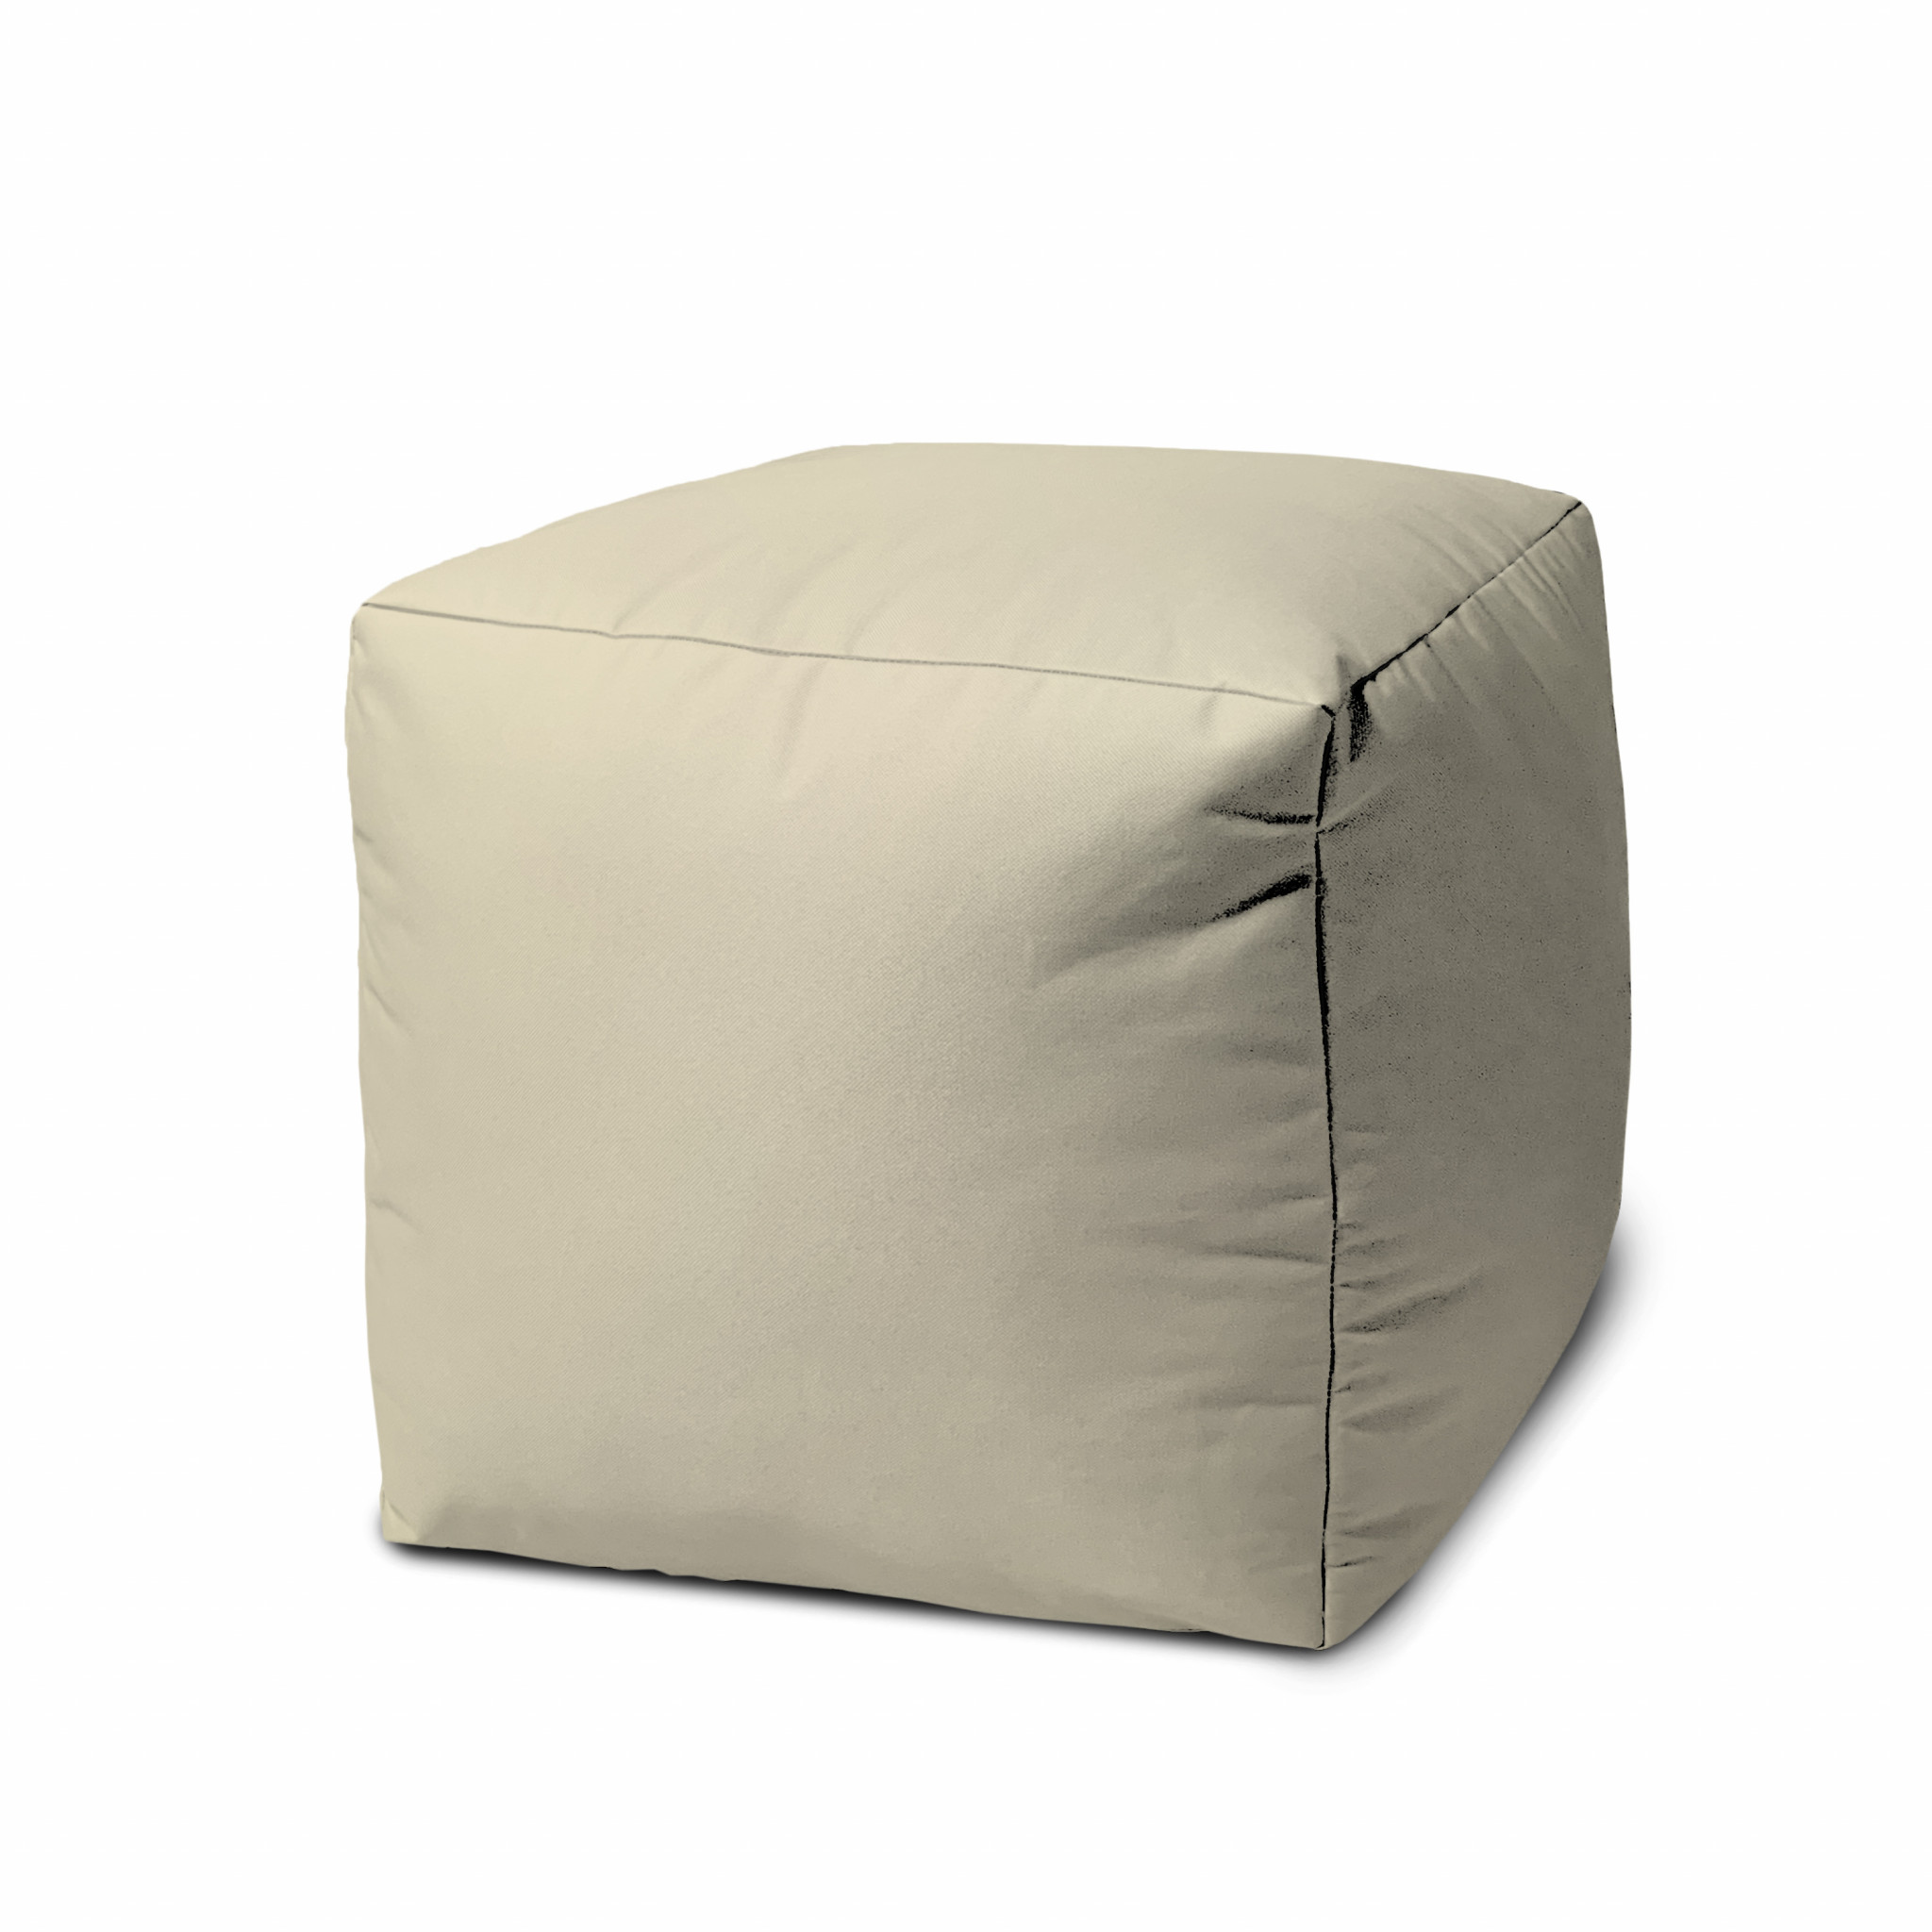 17" Cool Neutral Ivory Solid Color Indoor Outdoor Pouf Ottoman-474131-1